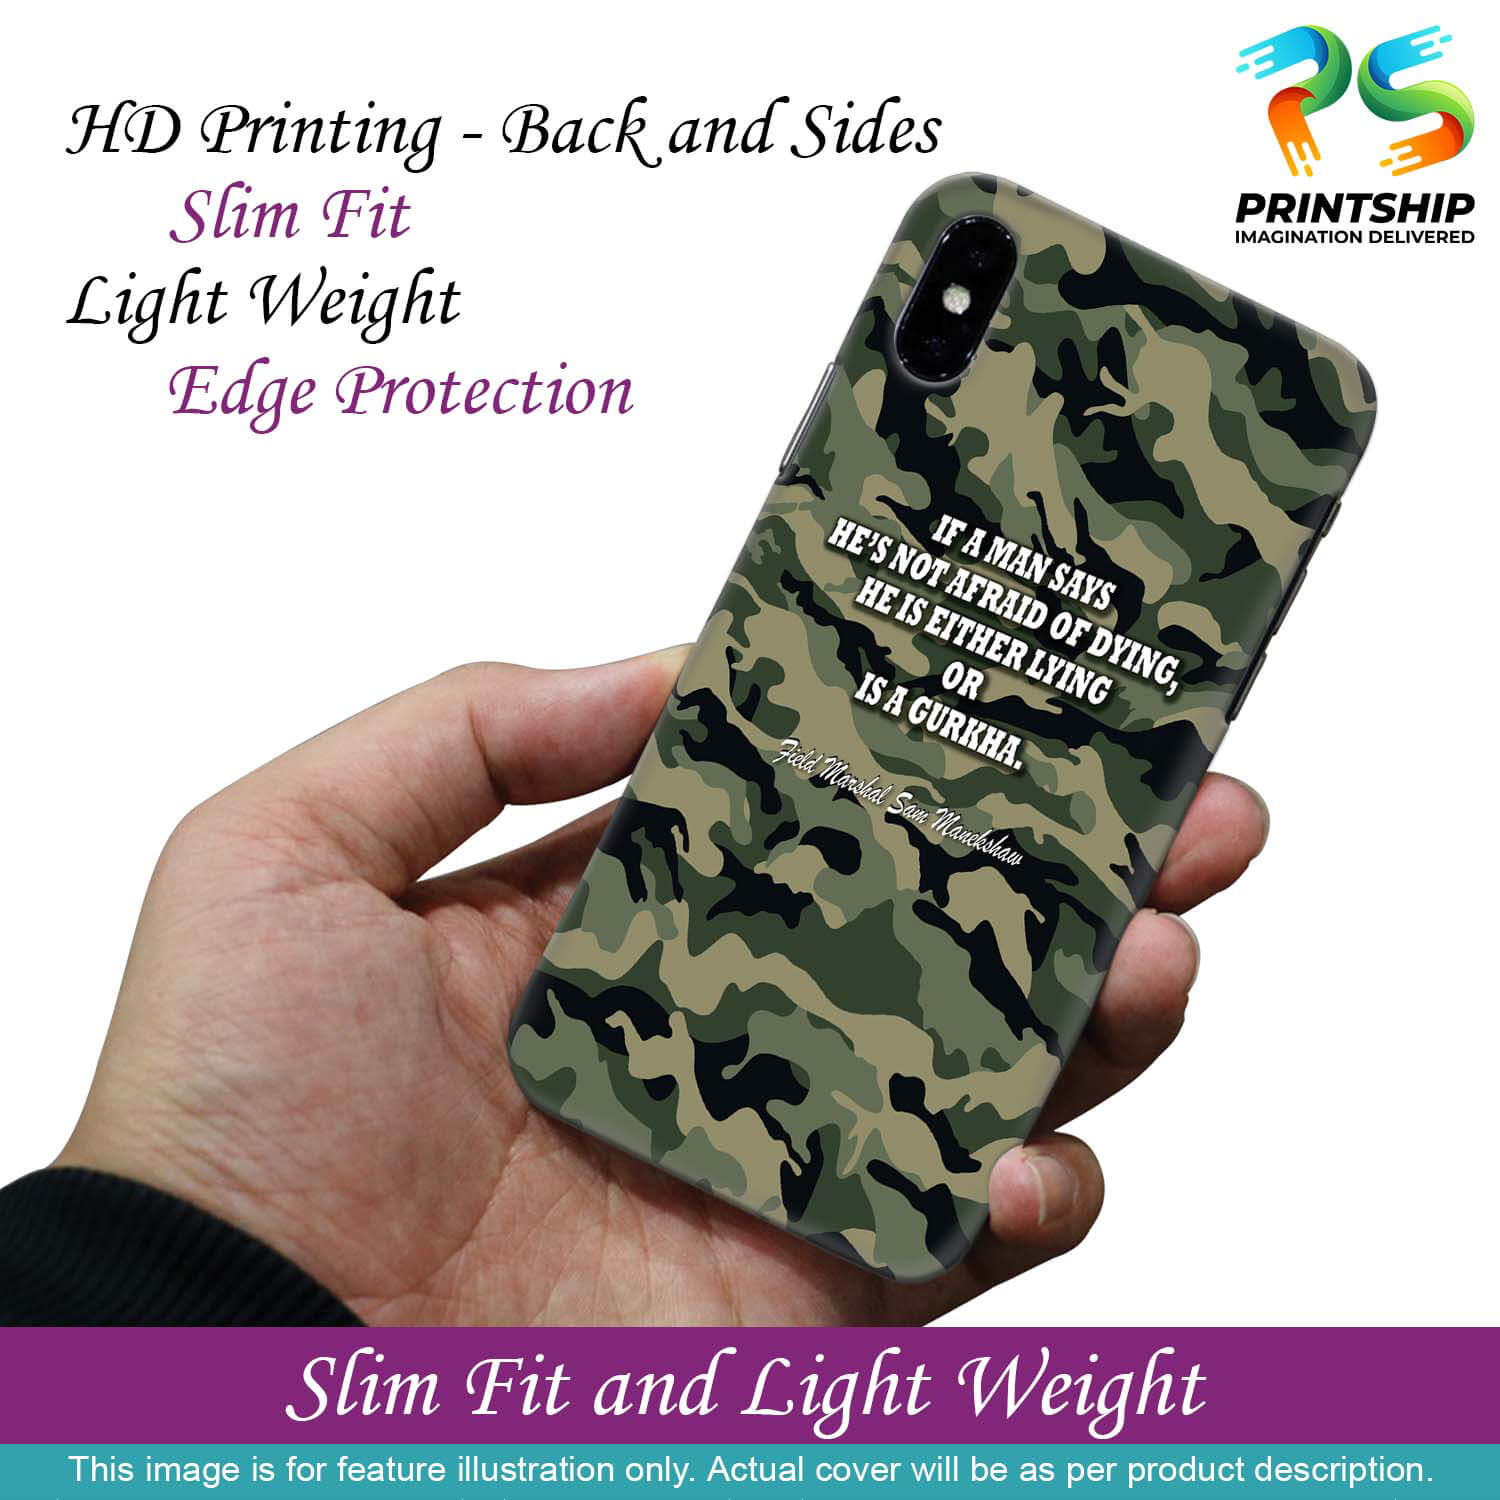 W0450-Indian Army Quote Back Cover for Apple iPhone 12 Pro